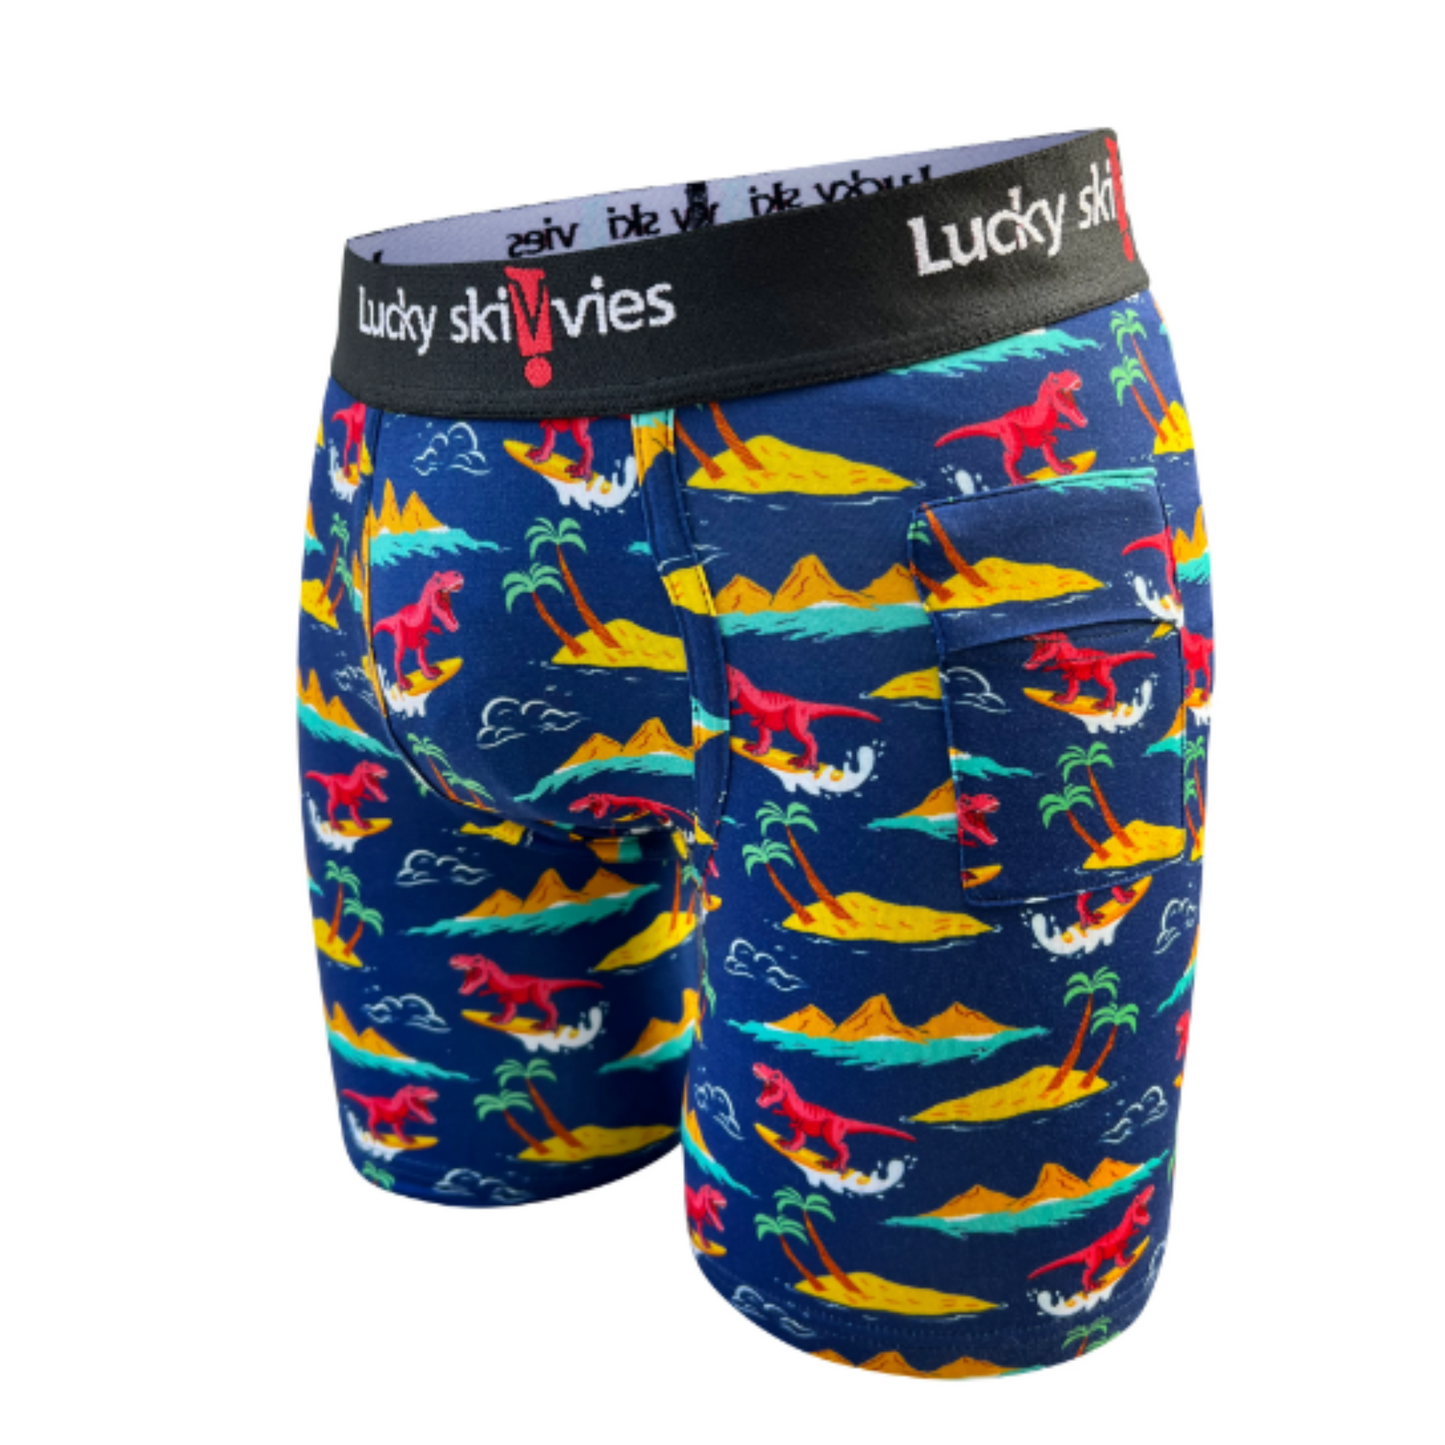 Surfing Dinosaurs Gender Neutral Boxer Briefs by Lucky Skivvies